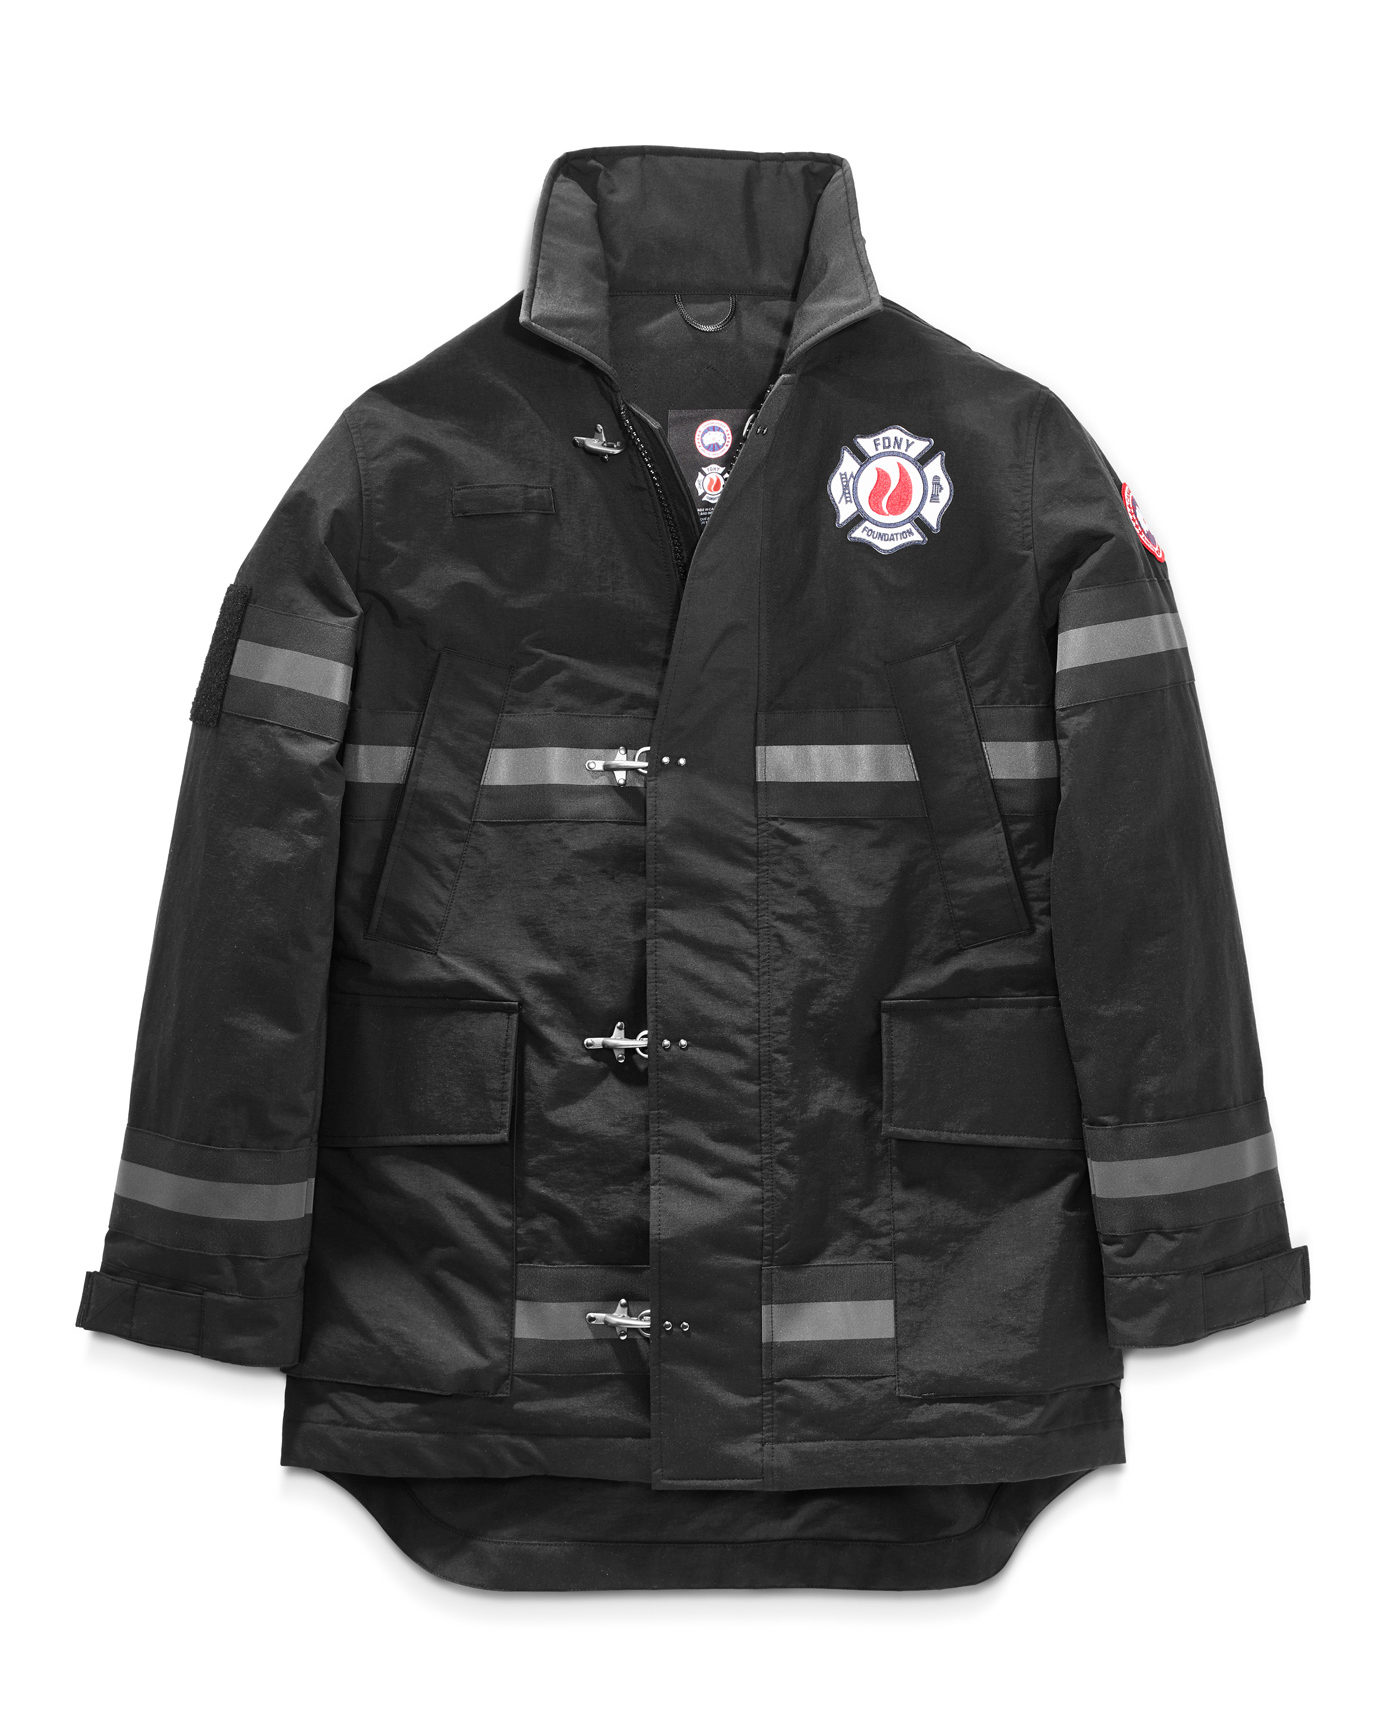 Canada Goose x FDNY – The Bravest Coat White Background